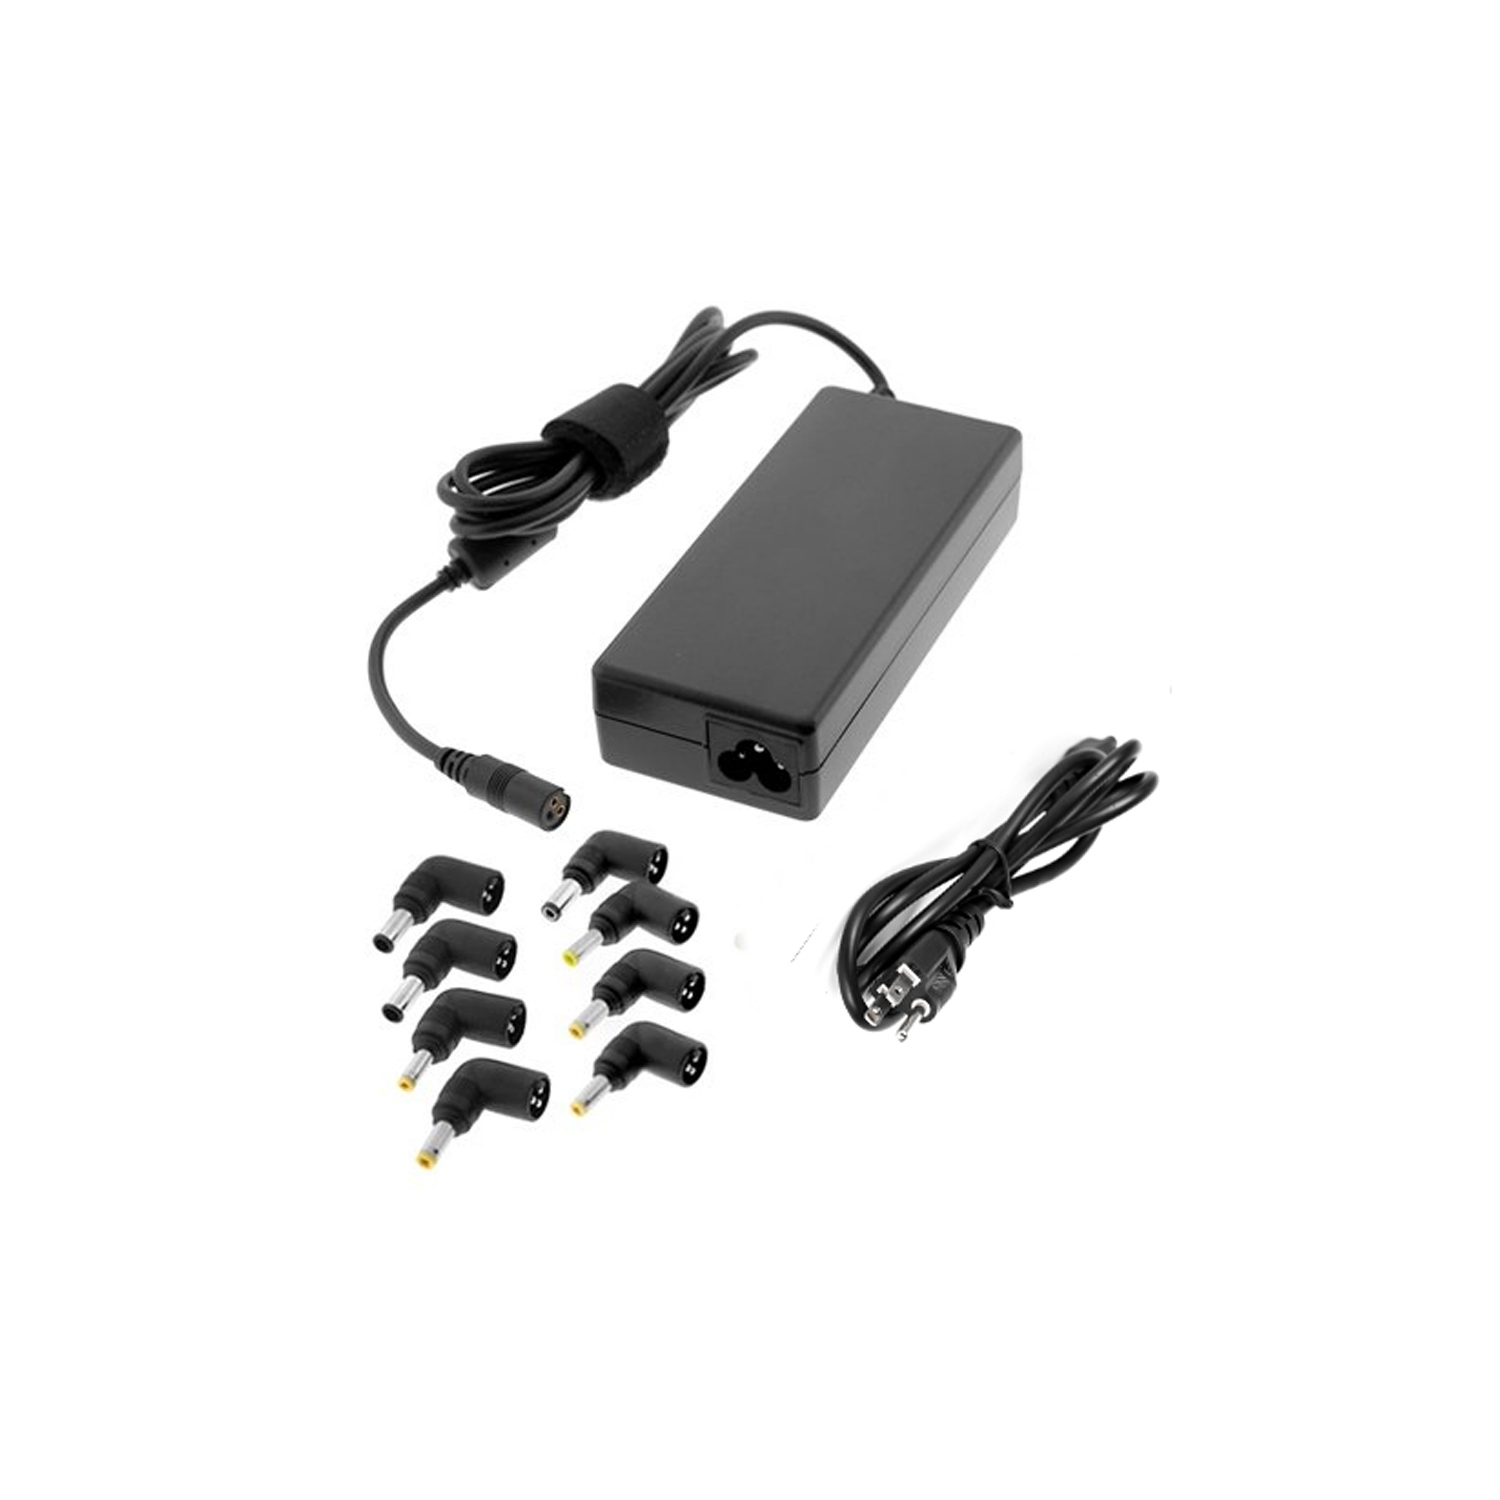 Superb Choice® 90W Universal Laptop Notebook AC Power Adapter+Cord NEW Power Supply Adapter